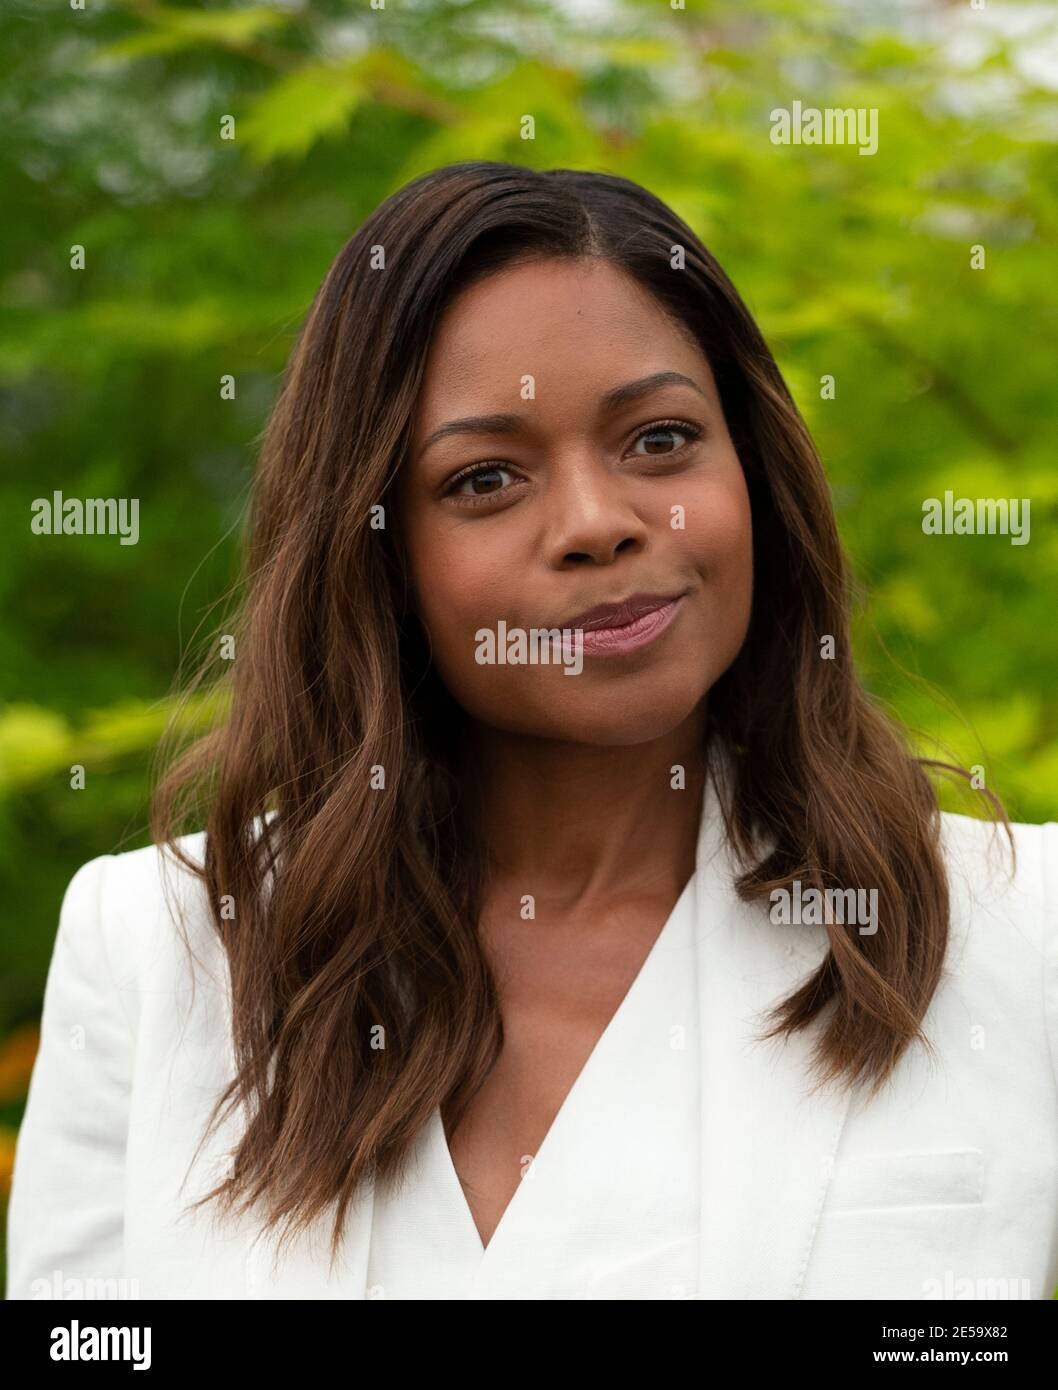 Chelsea, London UK. 23rd May 2016. Portrait of actress Naomie Harris in the Great Pavilion during press day at the RHS Chelsea Flower Show. Stock Photo